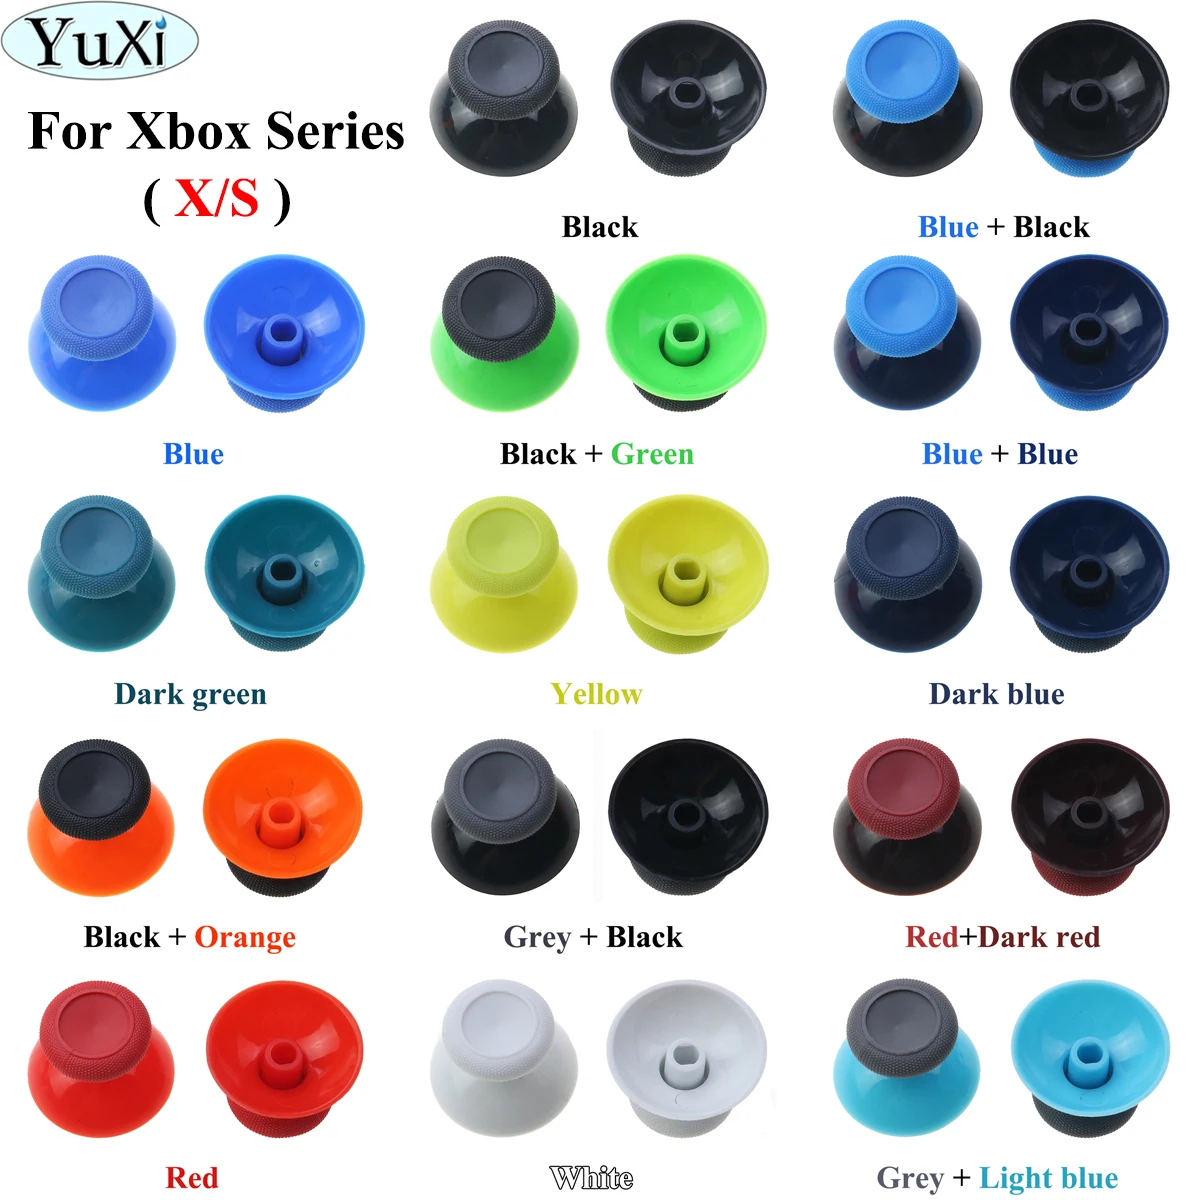 

YuXi 2pcs 3D Analog Thumb Sticks for XBox One Series X S XSS XSX Controller Analogue Thumbsticks Caps Mushroom Grips Cover